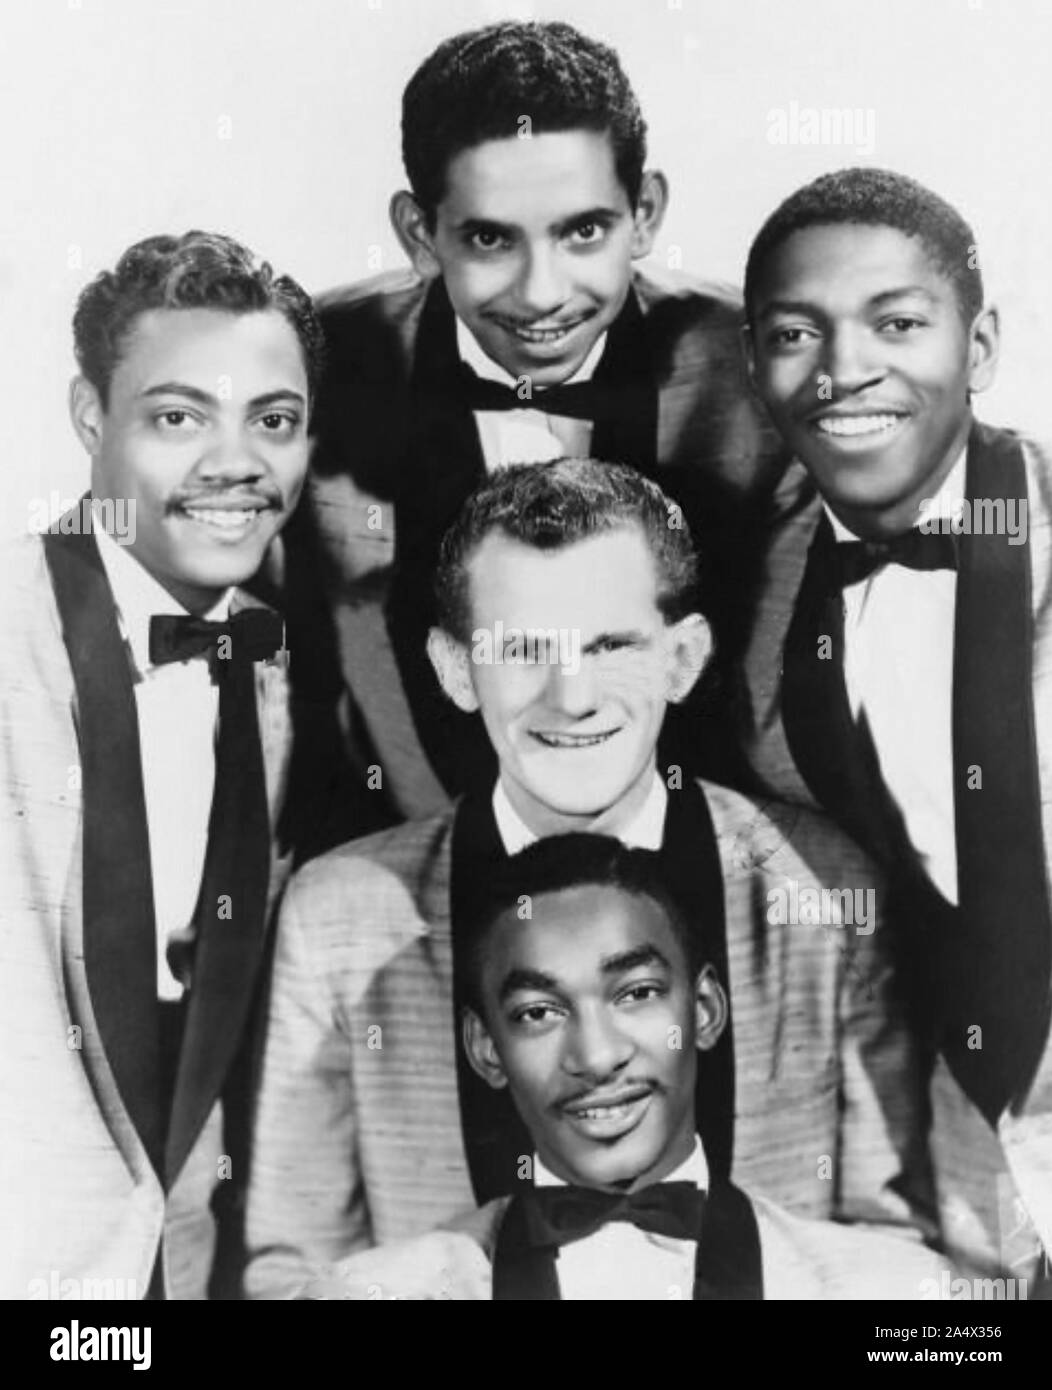 DEL VIKINGS Promotional photo of American doo-wop musical group about 1957 Stock Photo